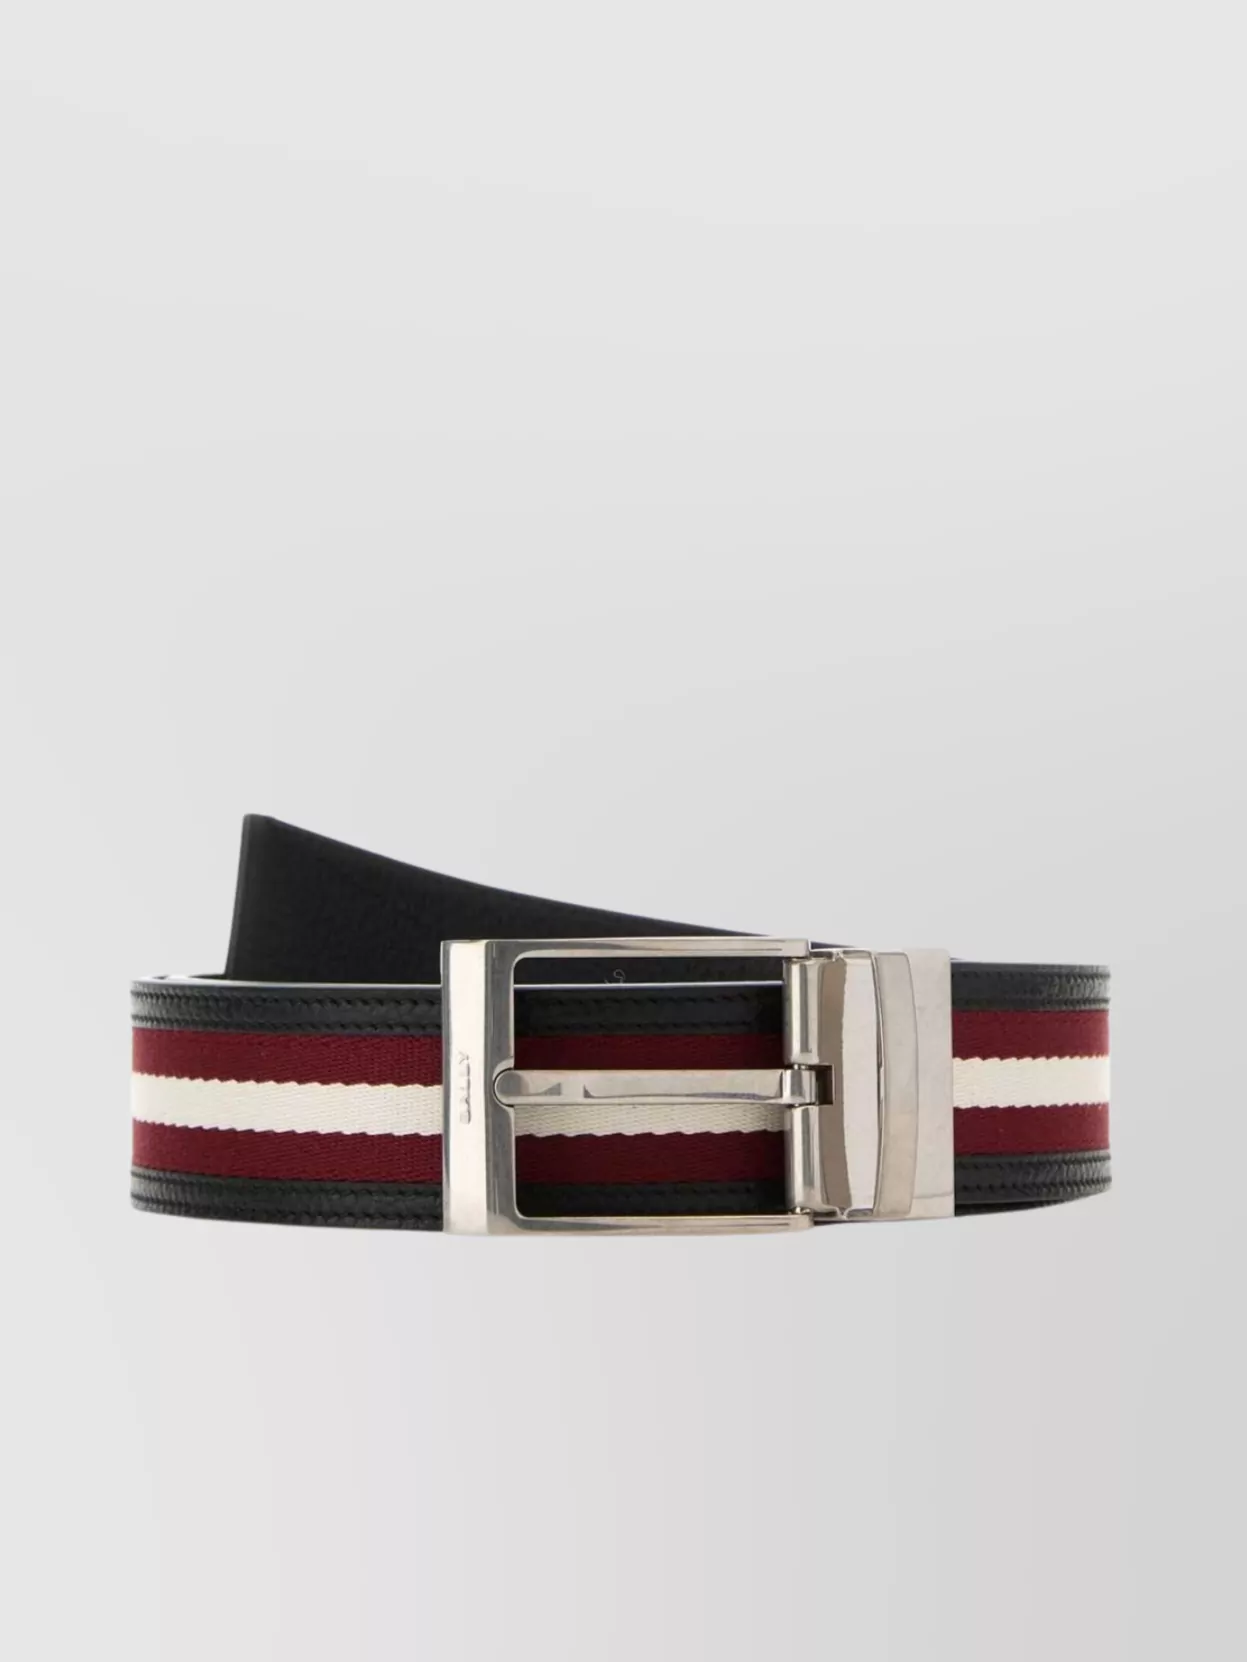 Bally Shiffie Belt With Adjustable Fit And Striped Pattern In Blackredbonepall